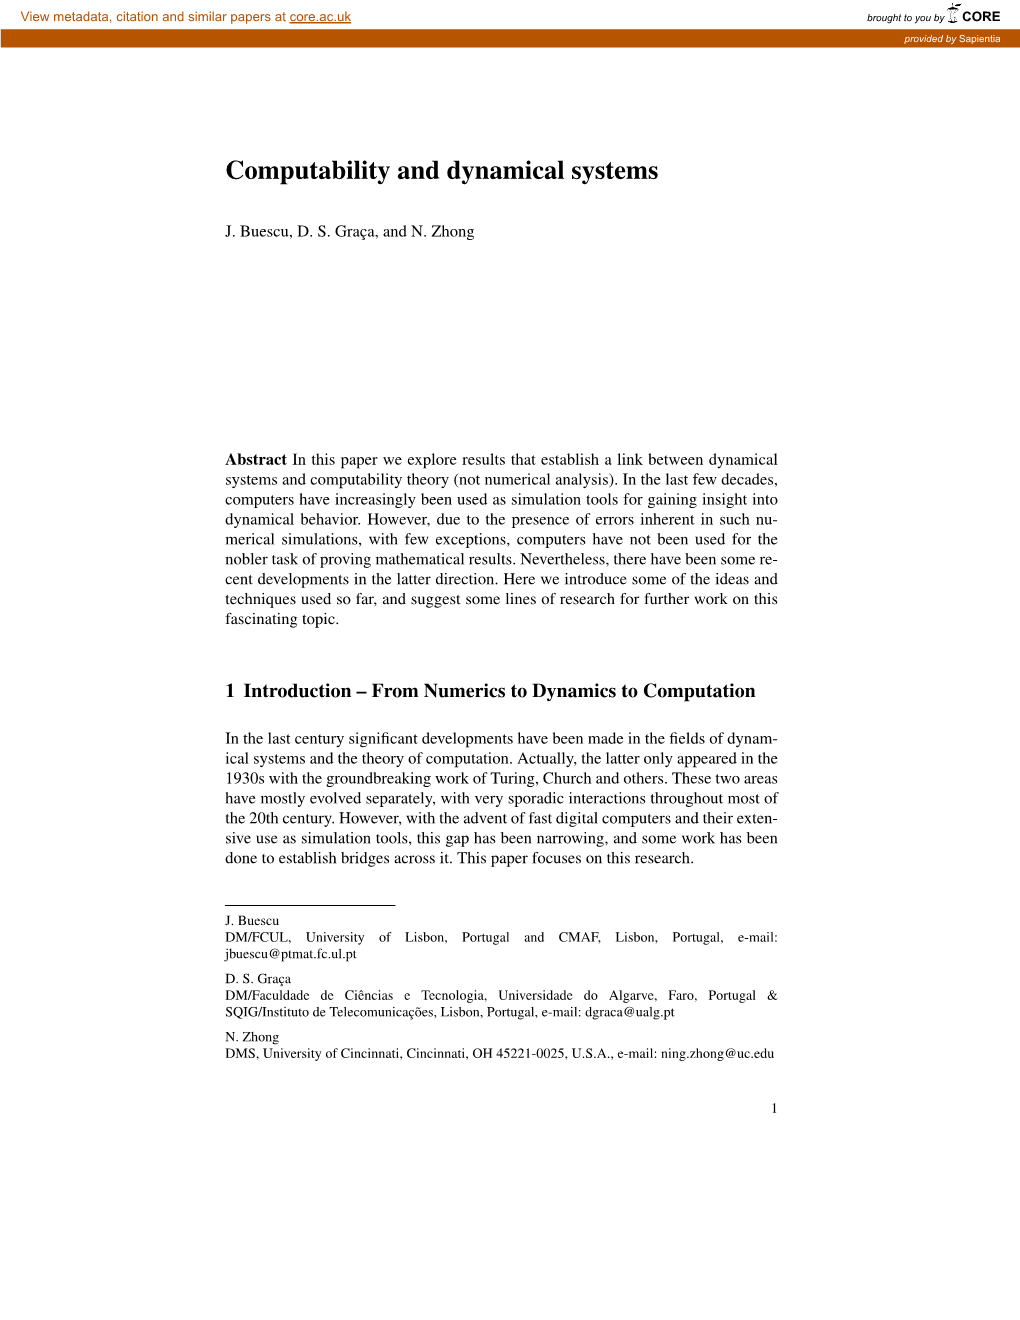 Computability and Dynamical Systems